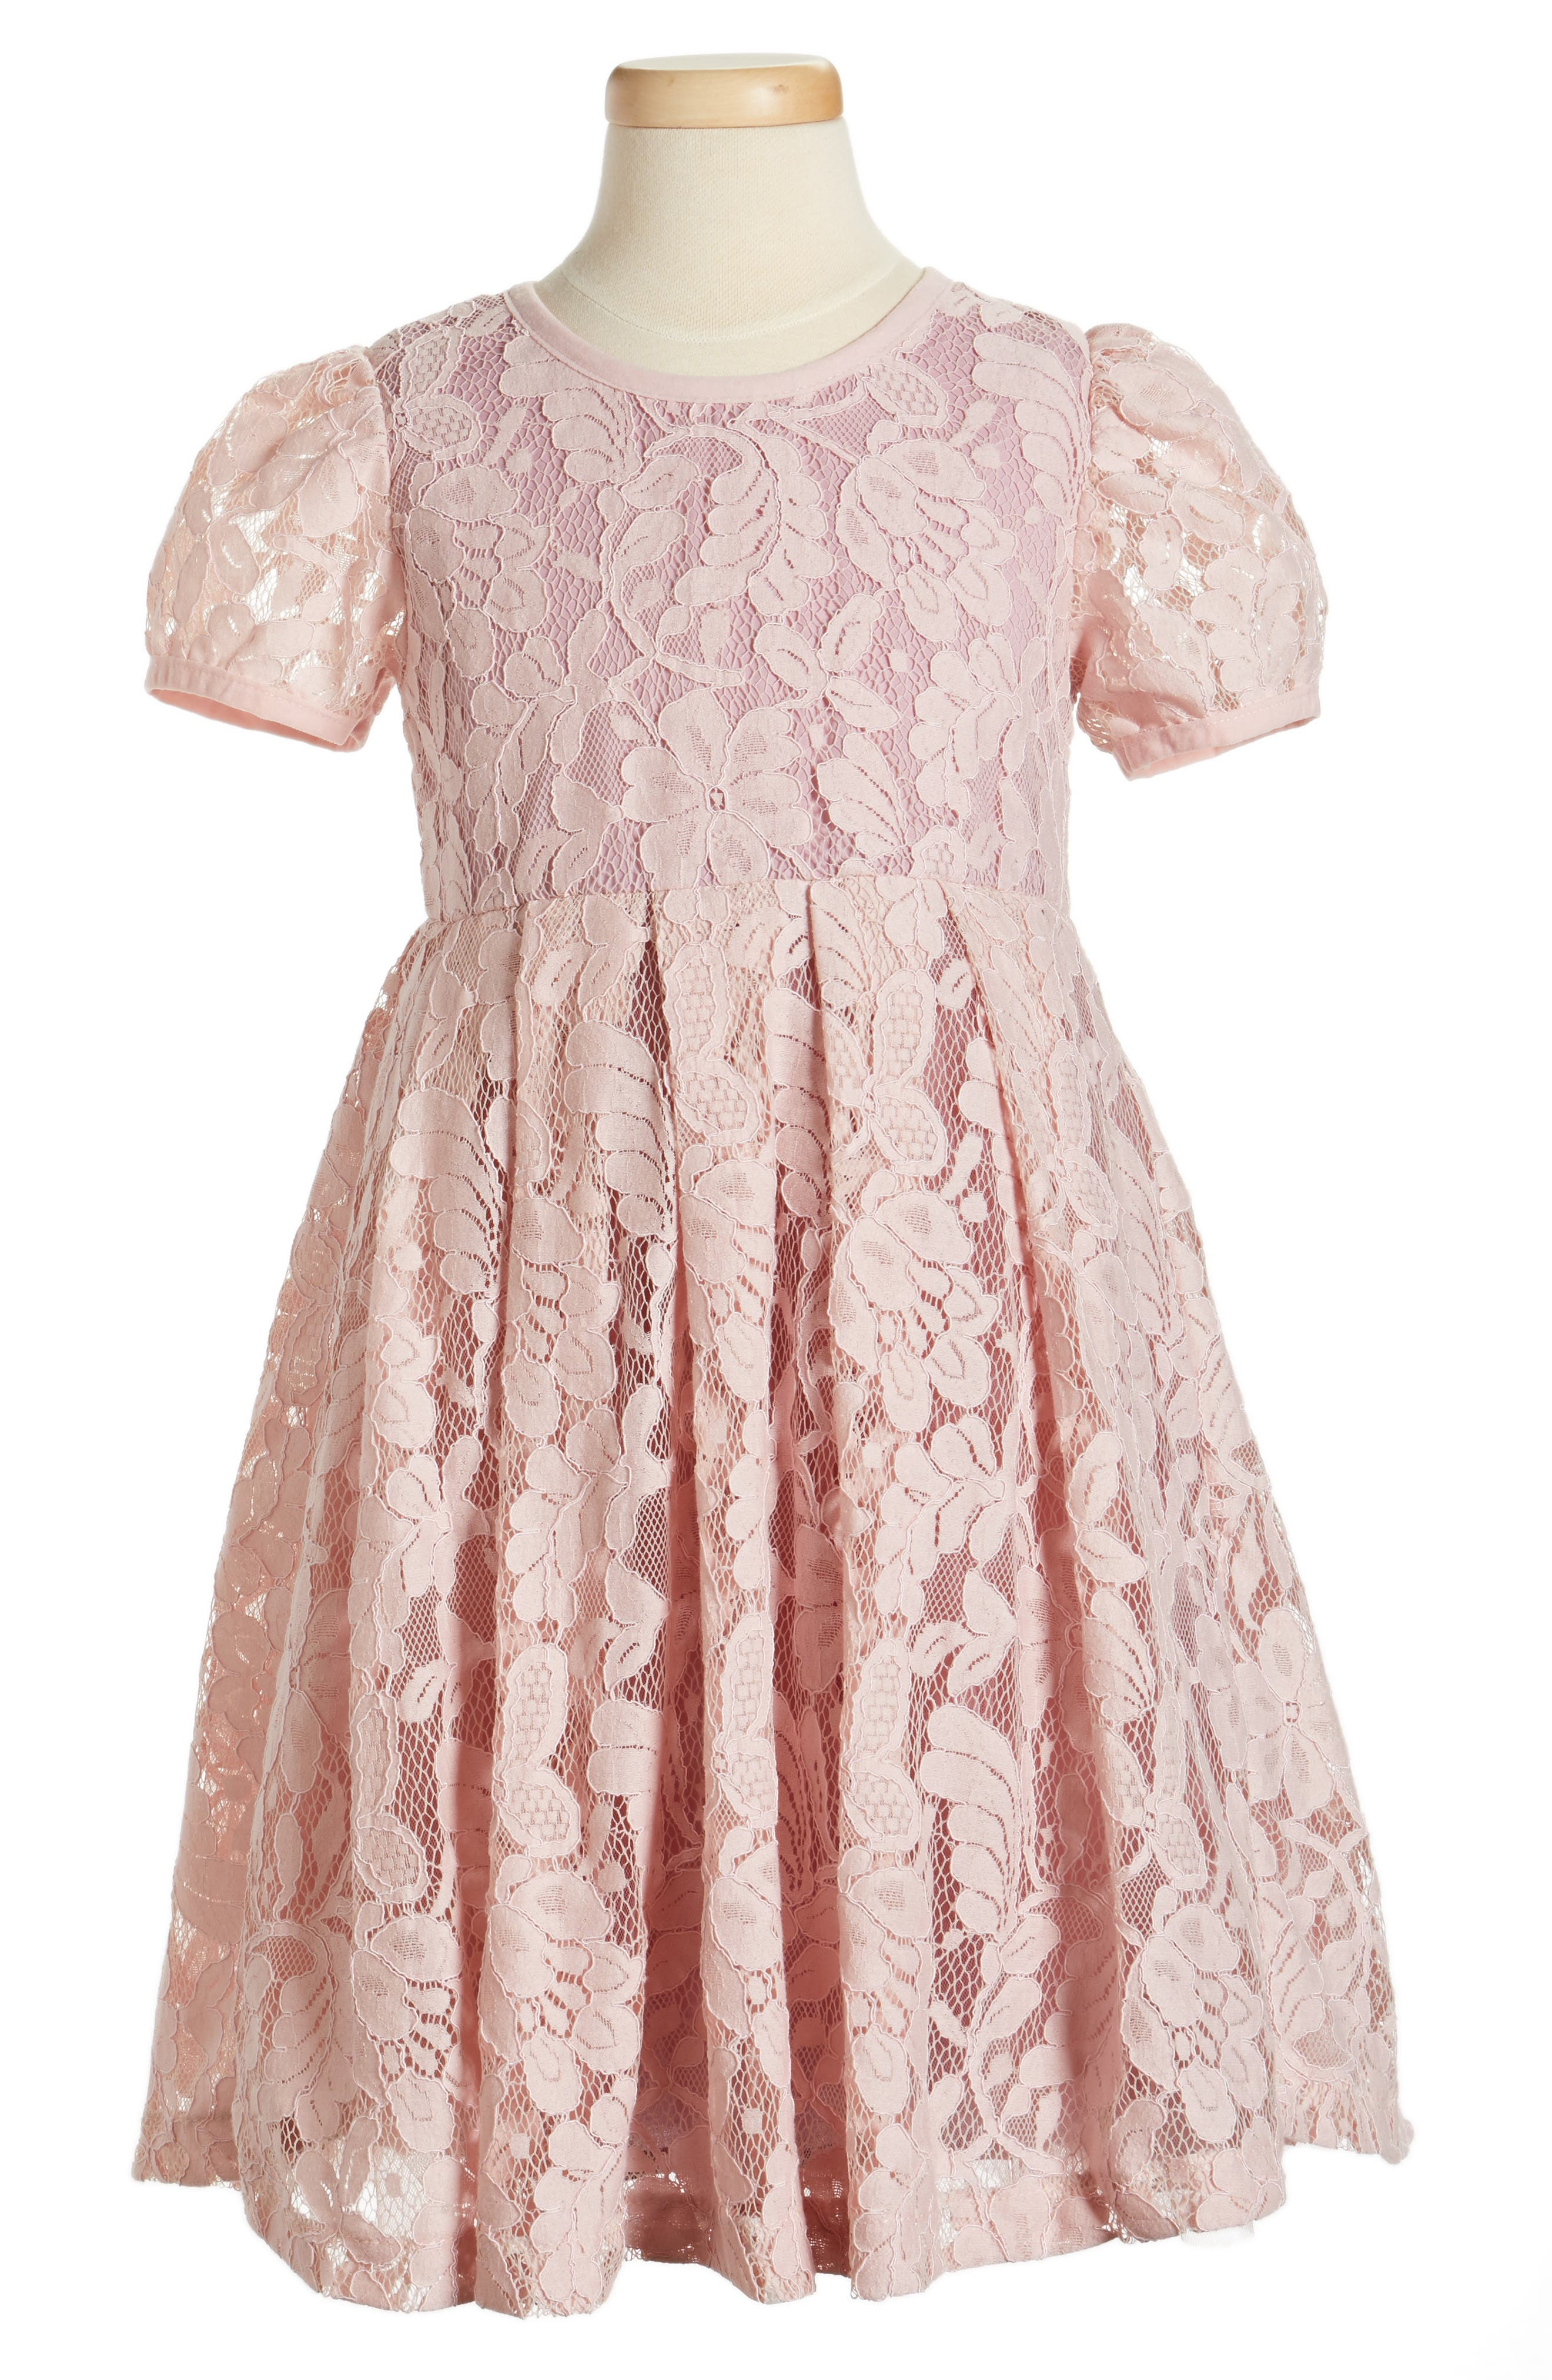 toddler lace dress